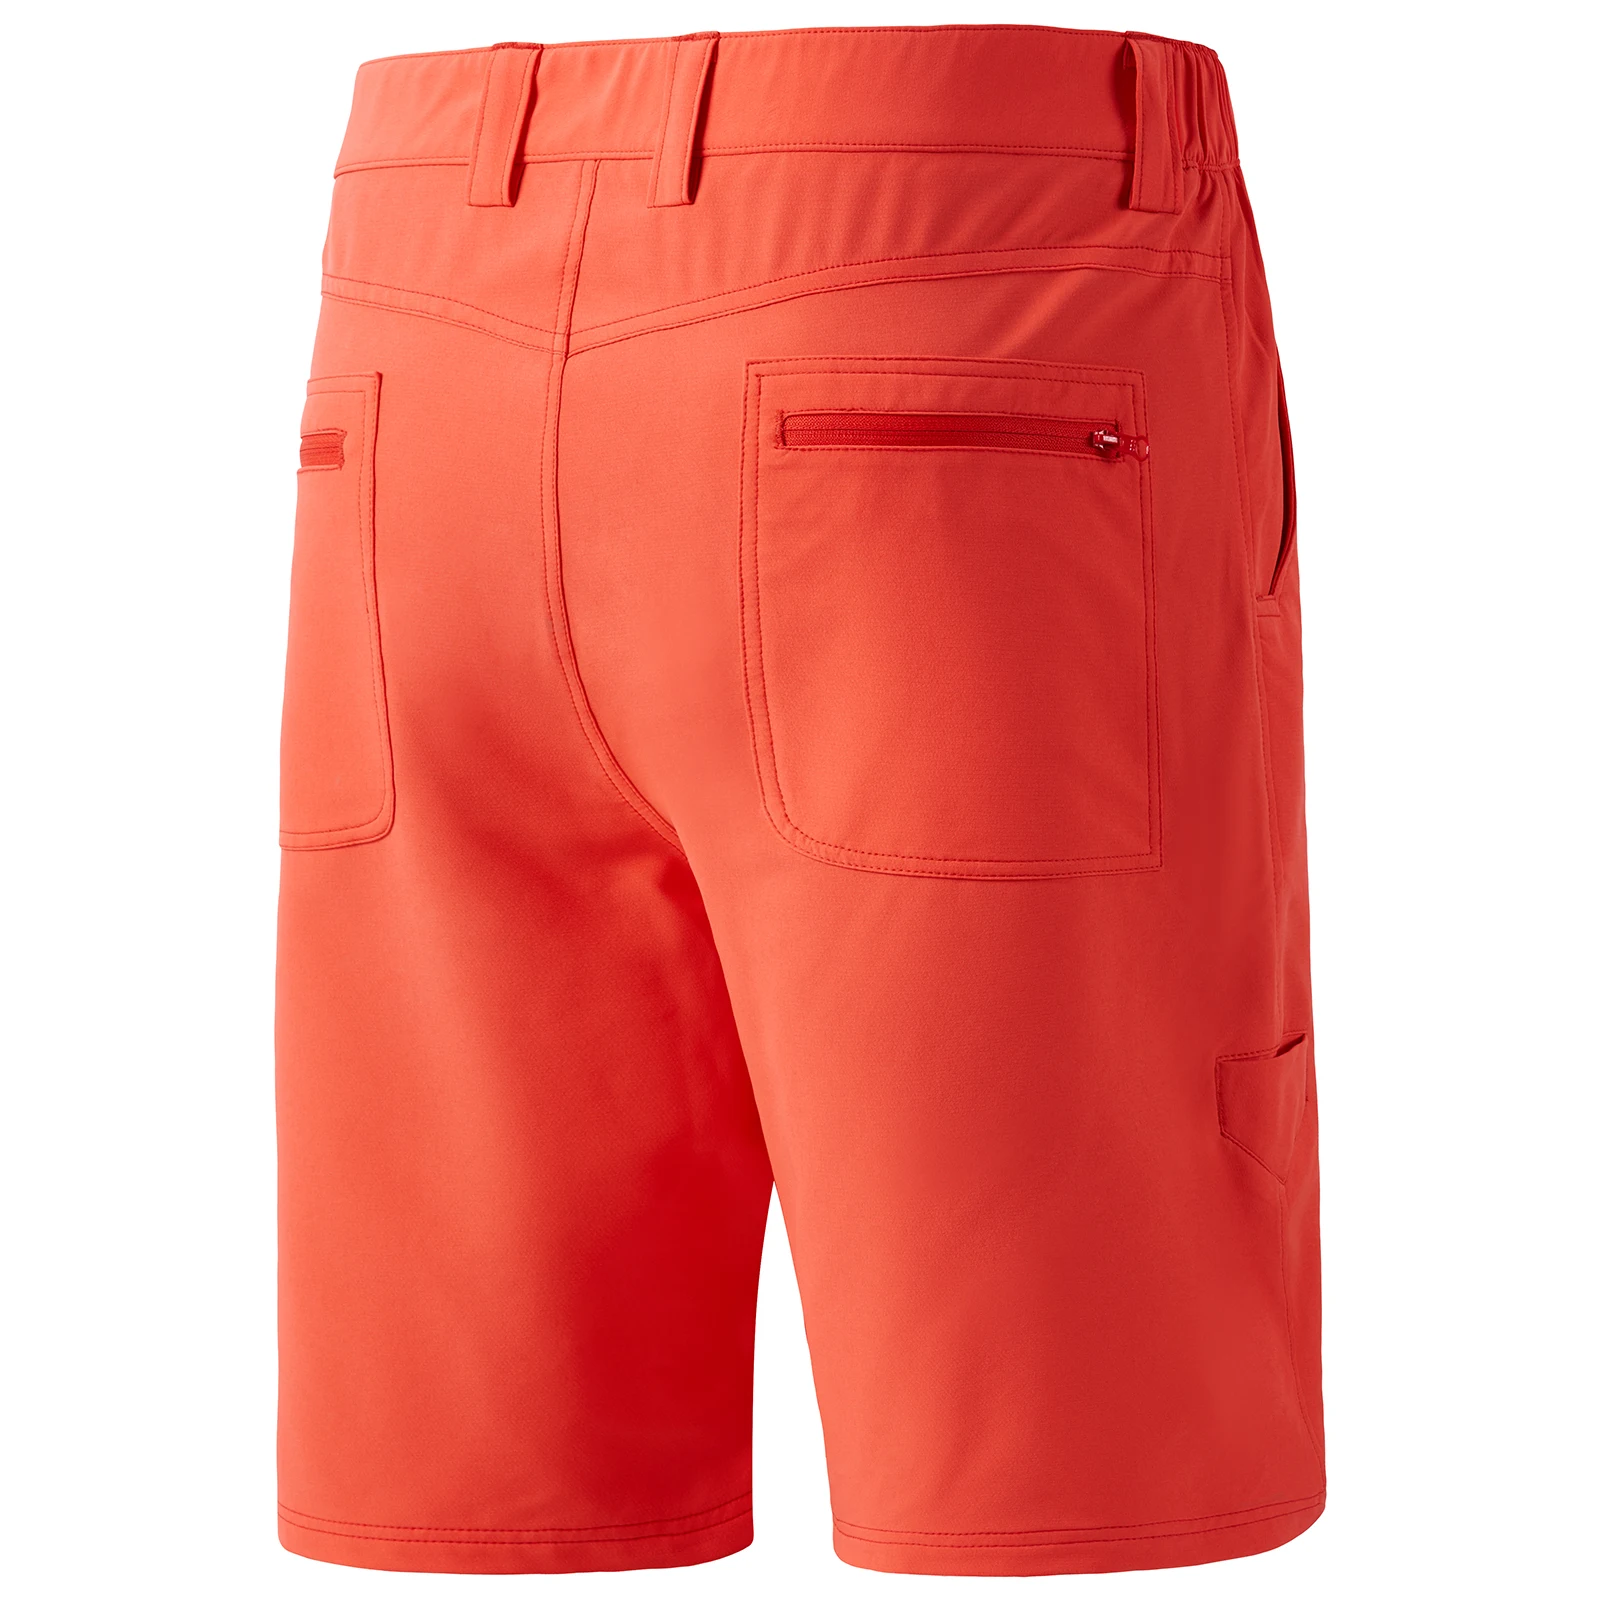 Bassdash Men Fishing Cargo Shorts Water Resistant With Zippered